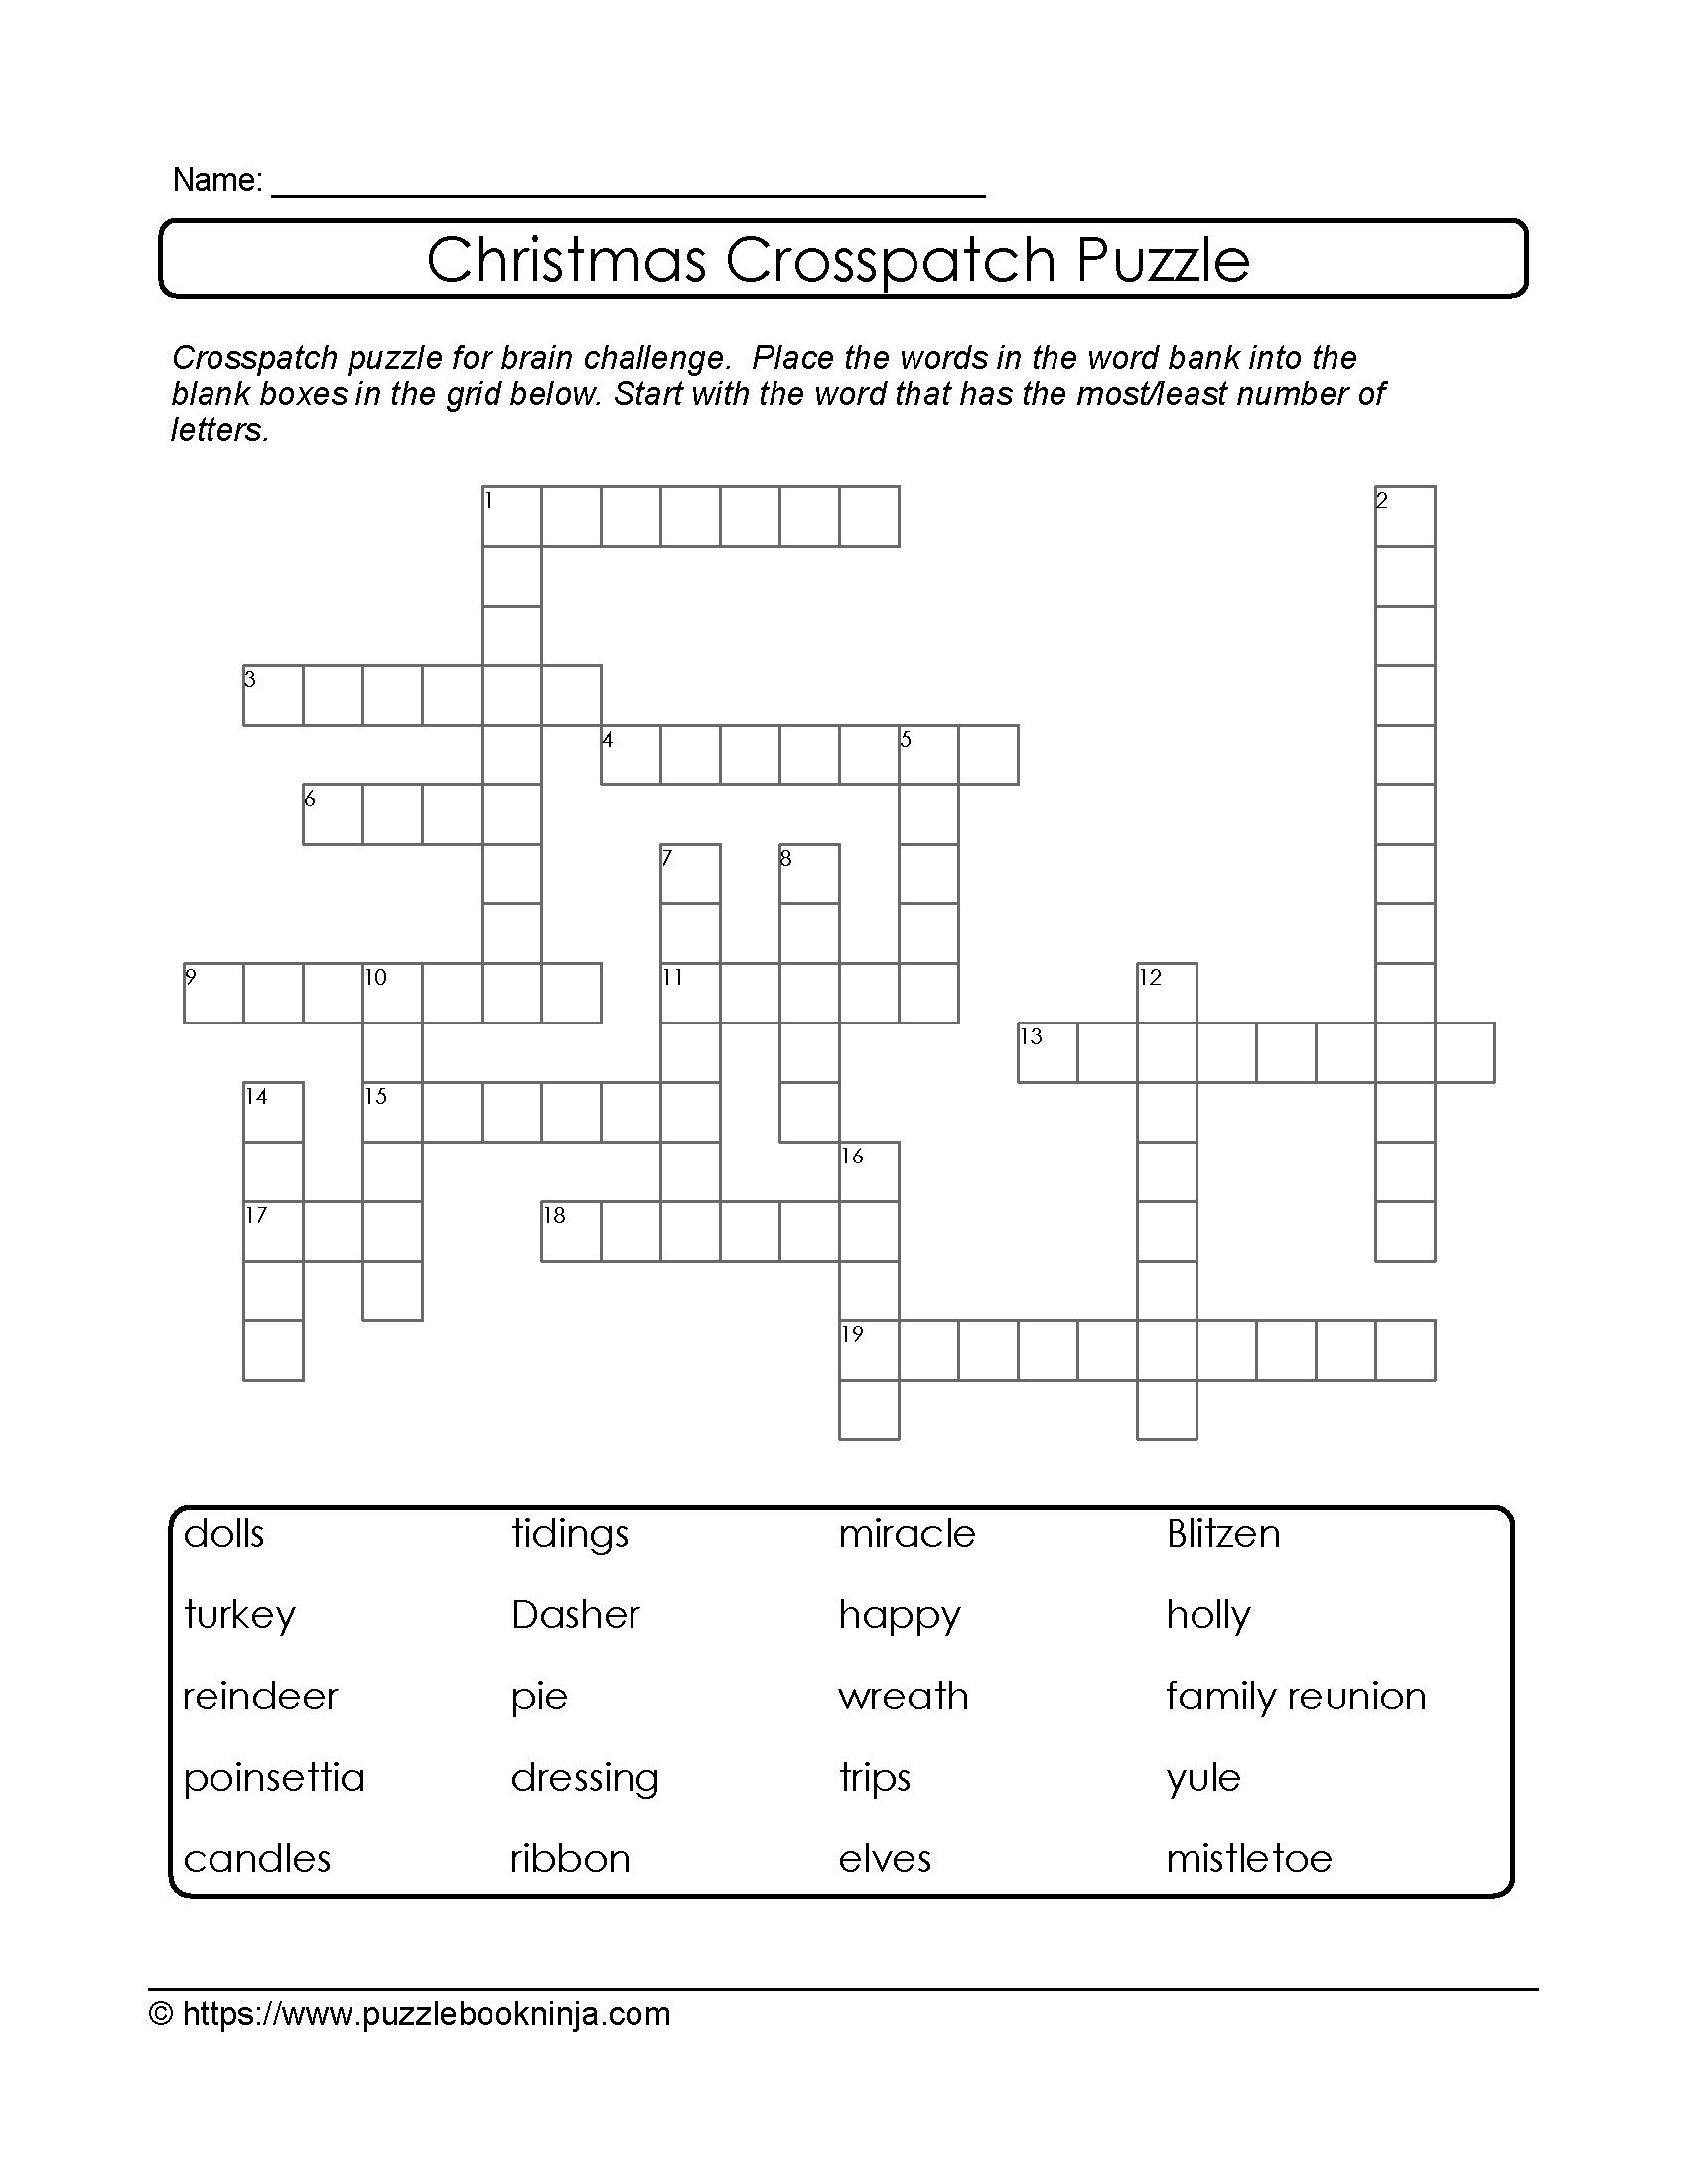 Crosspatch Xmas Printable Puzzle. Support Vocab Development And - Blank Crossword Puzzle Printable